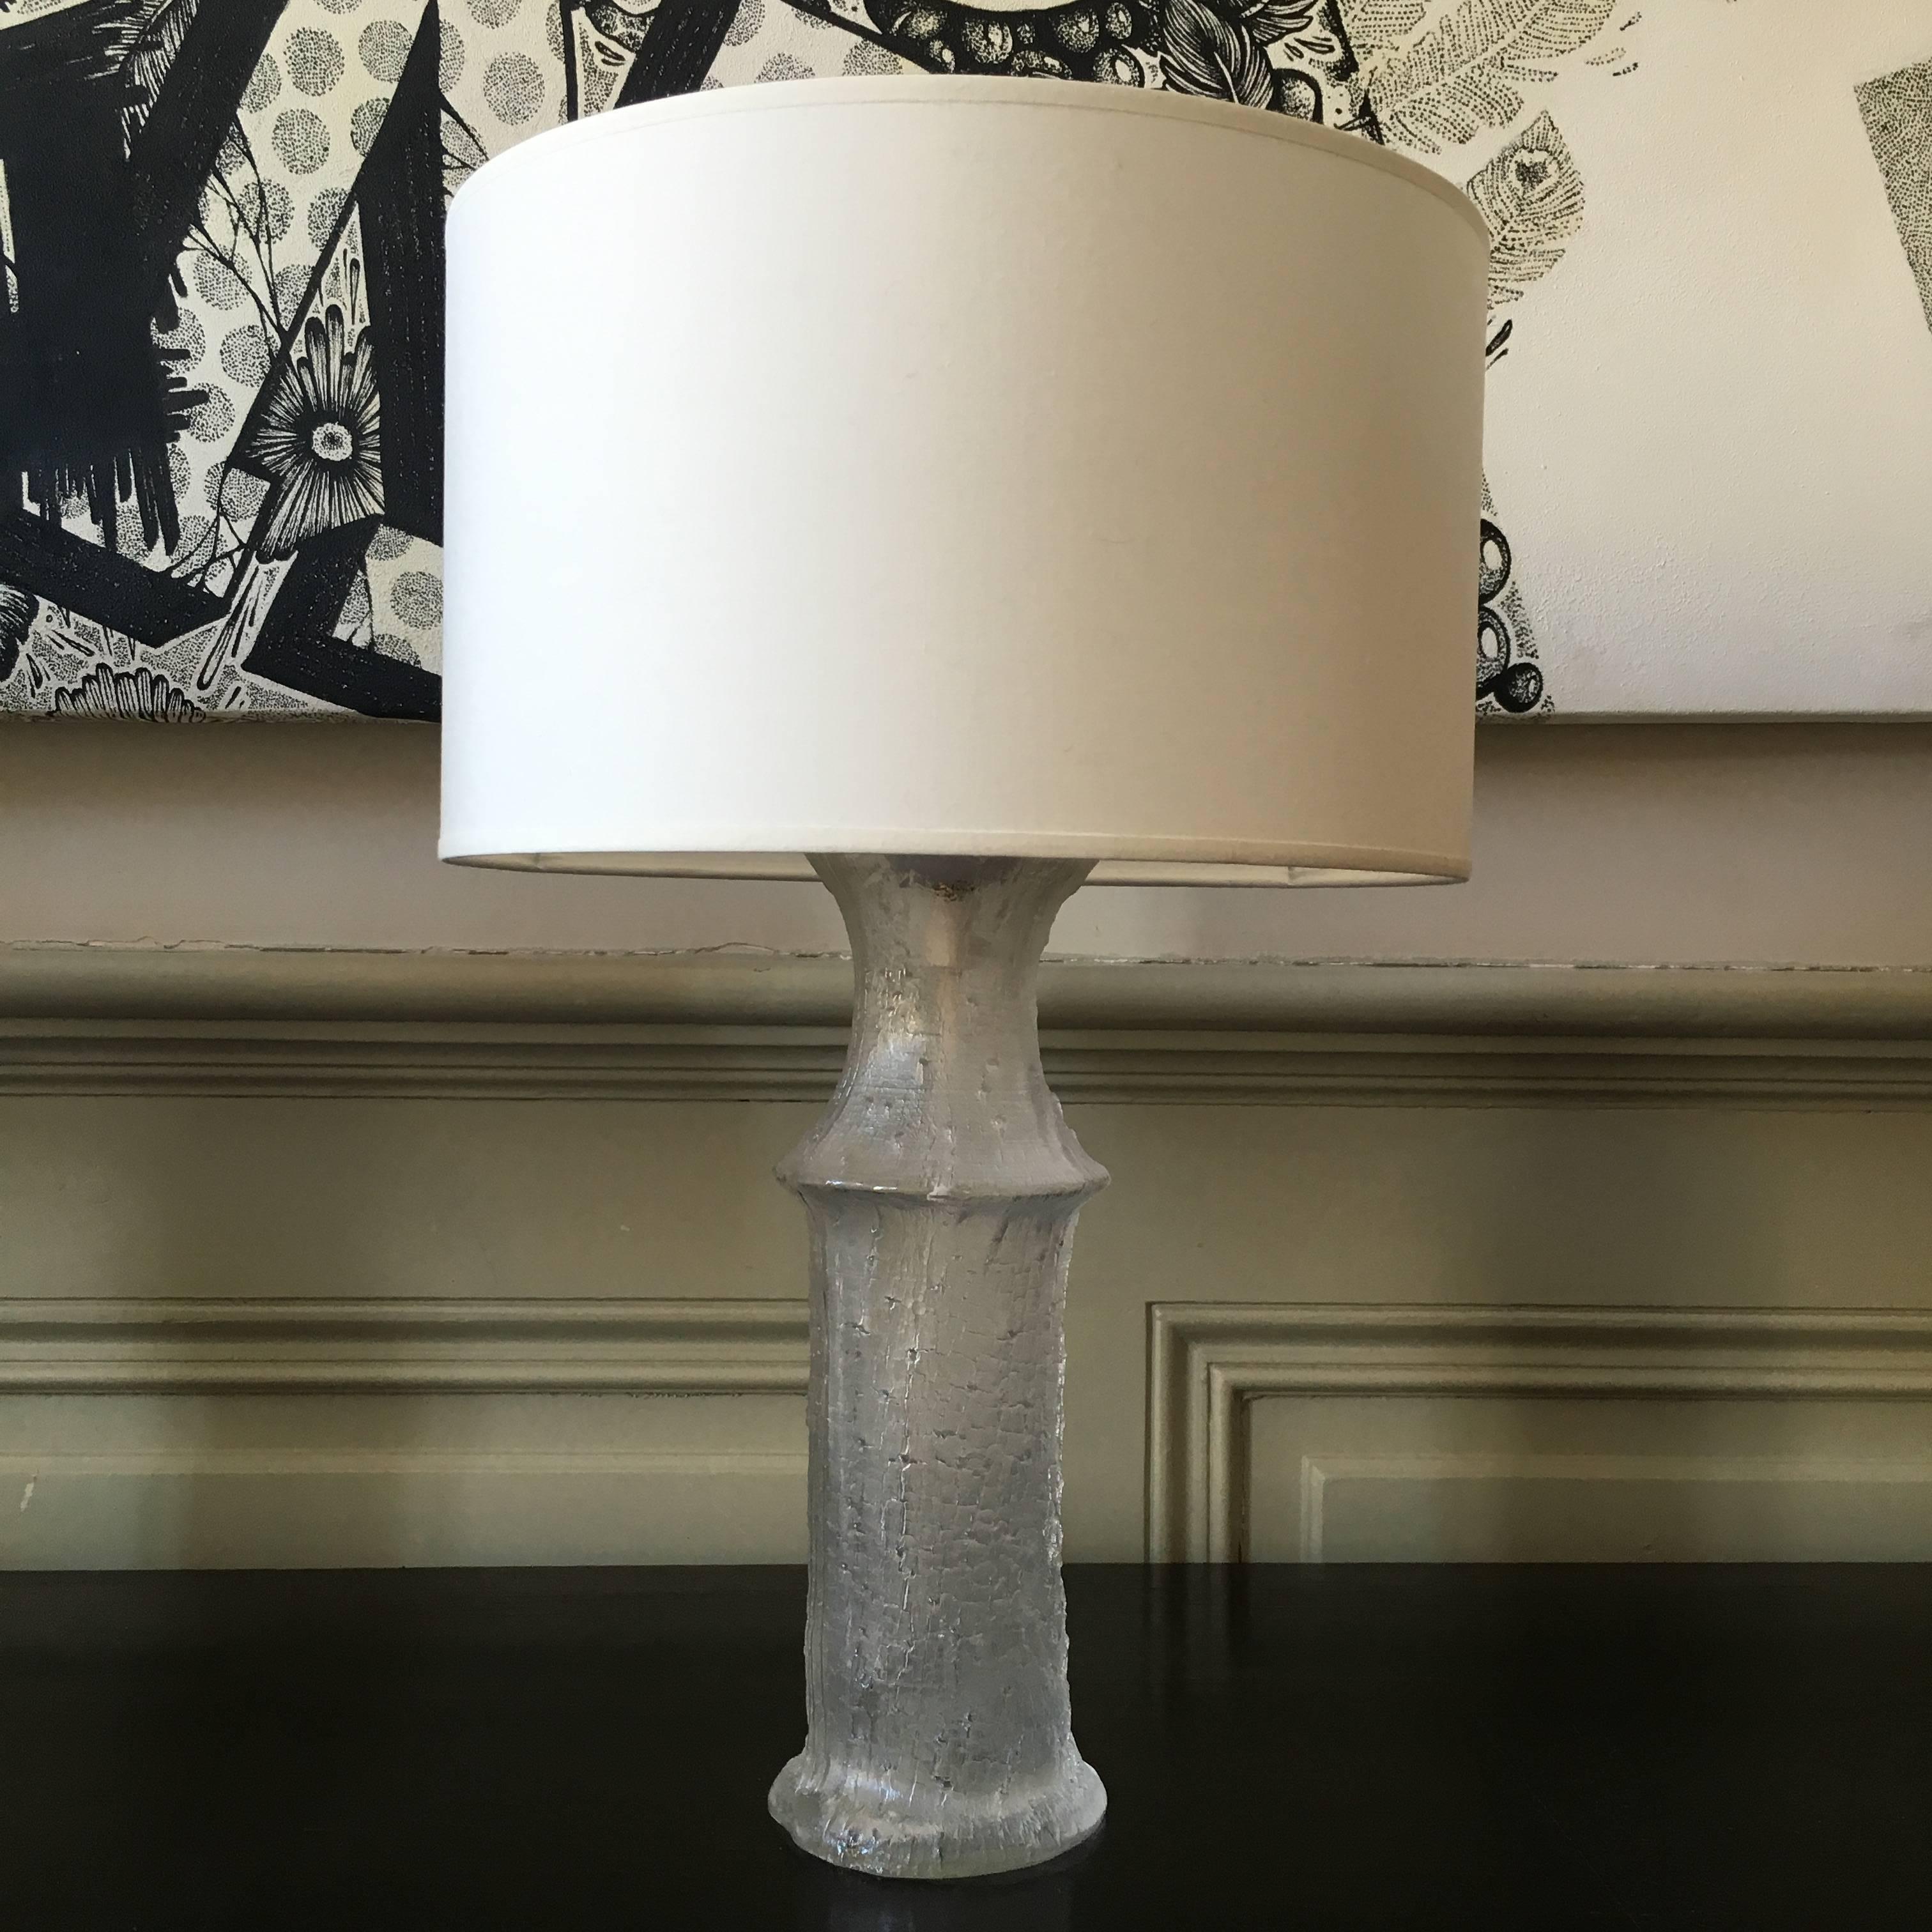 Rare pair of glass table lamps designed by Timo Sarpaneva.
Produced by Luxus, Sweden for Italia, circa 1970.
Textured and frosted clear glass.